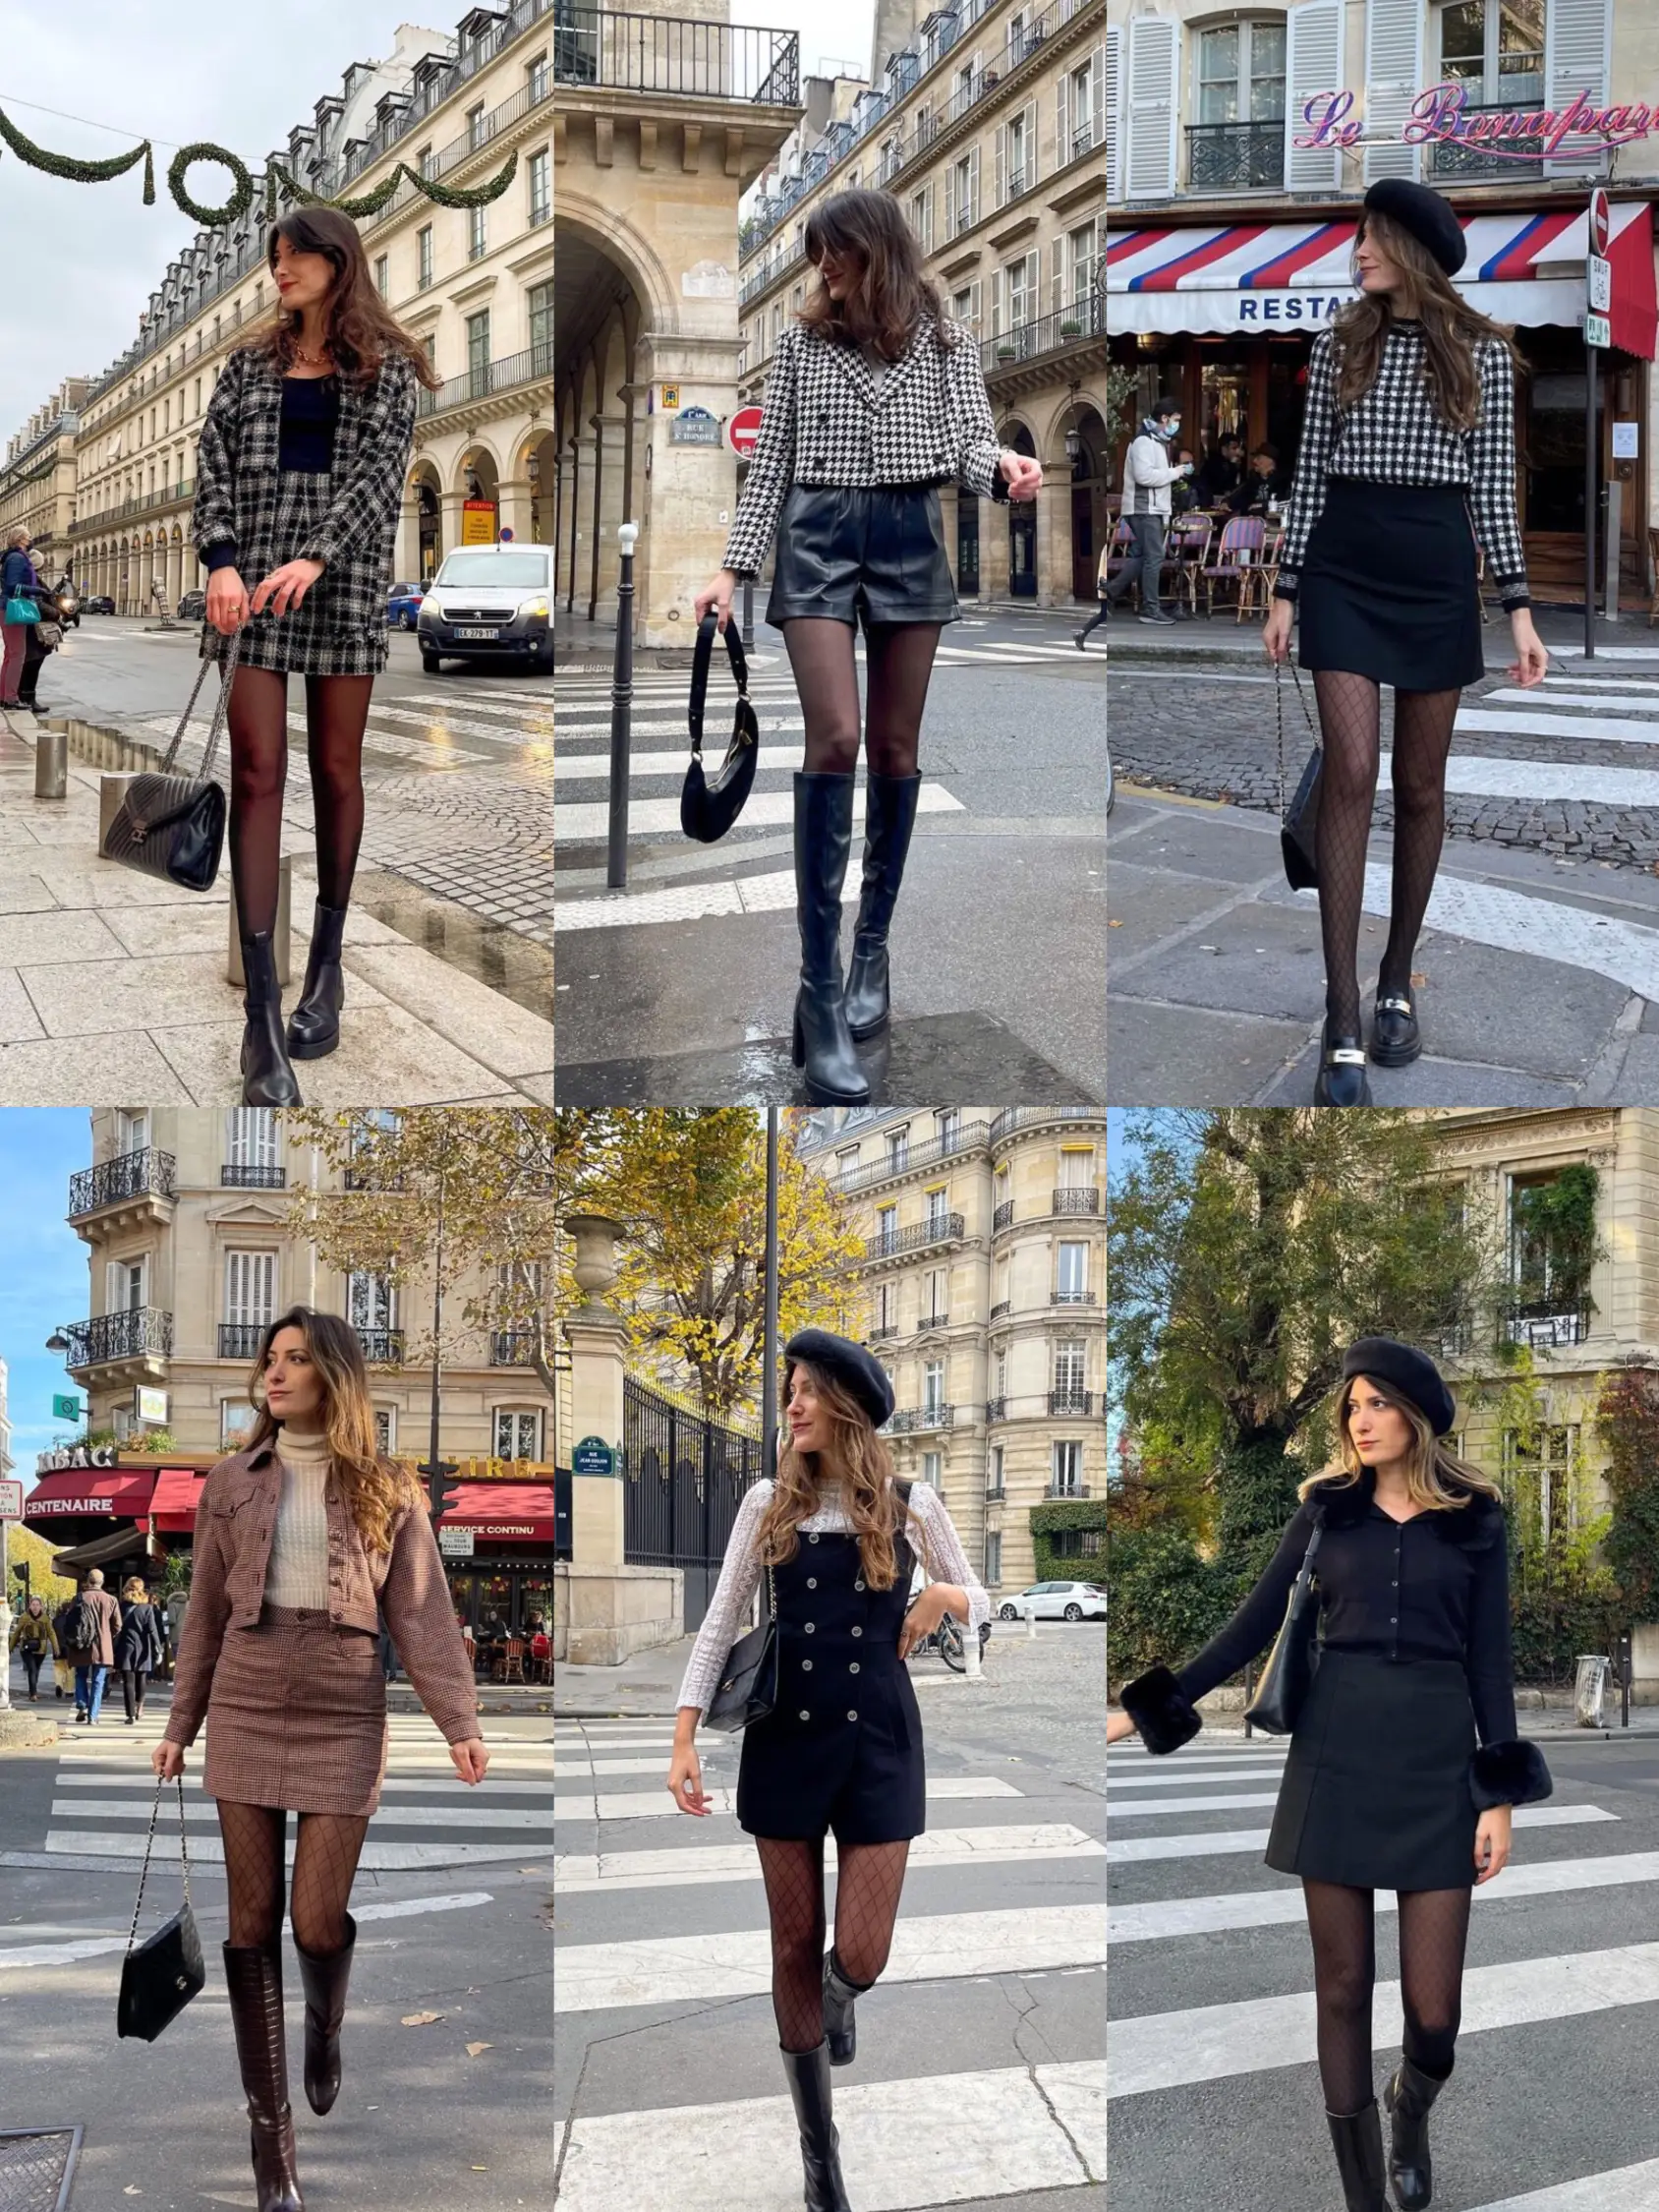 How to Dress For Winter Date Now - Jadore-Fashion  Winter dresses, Winter  date outfits, Leggings and heels